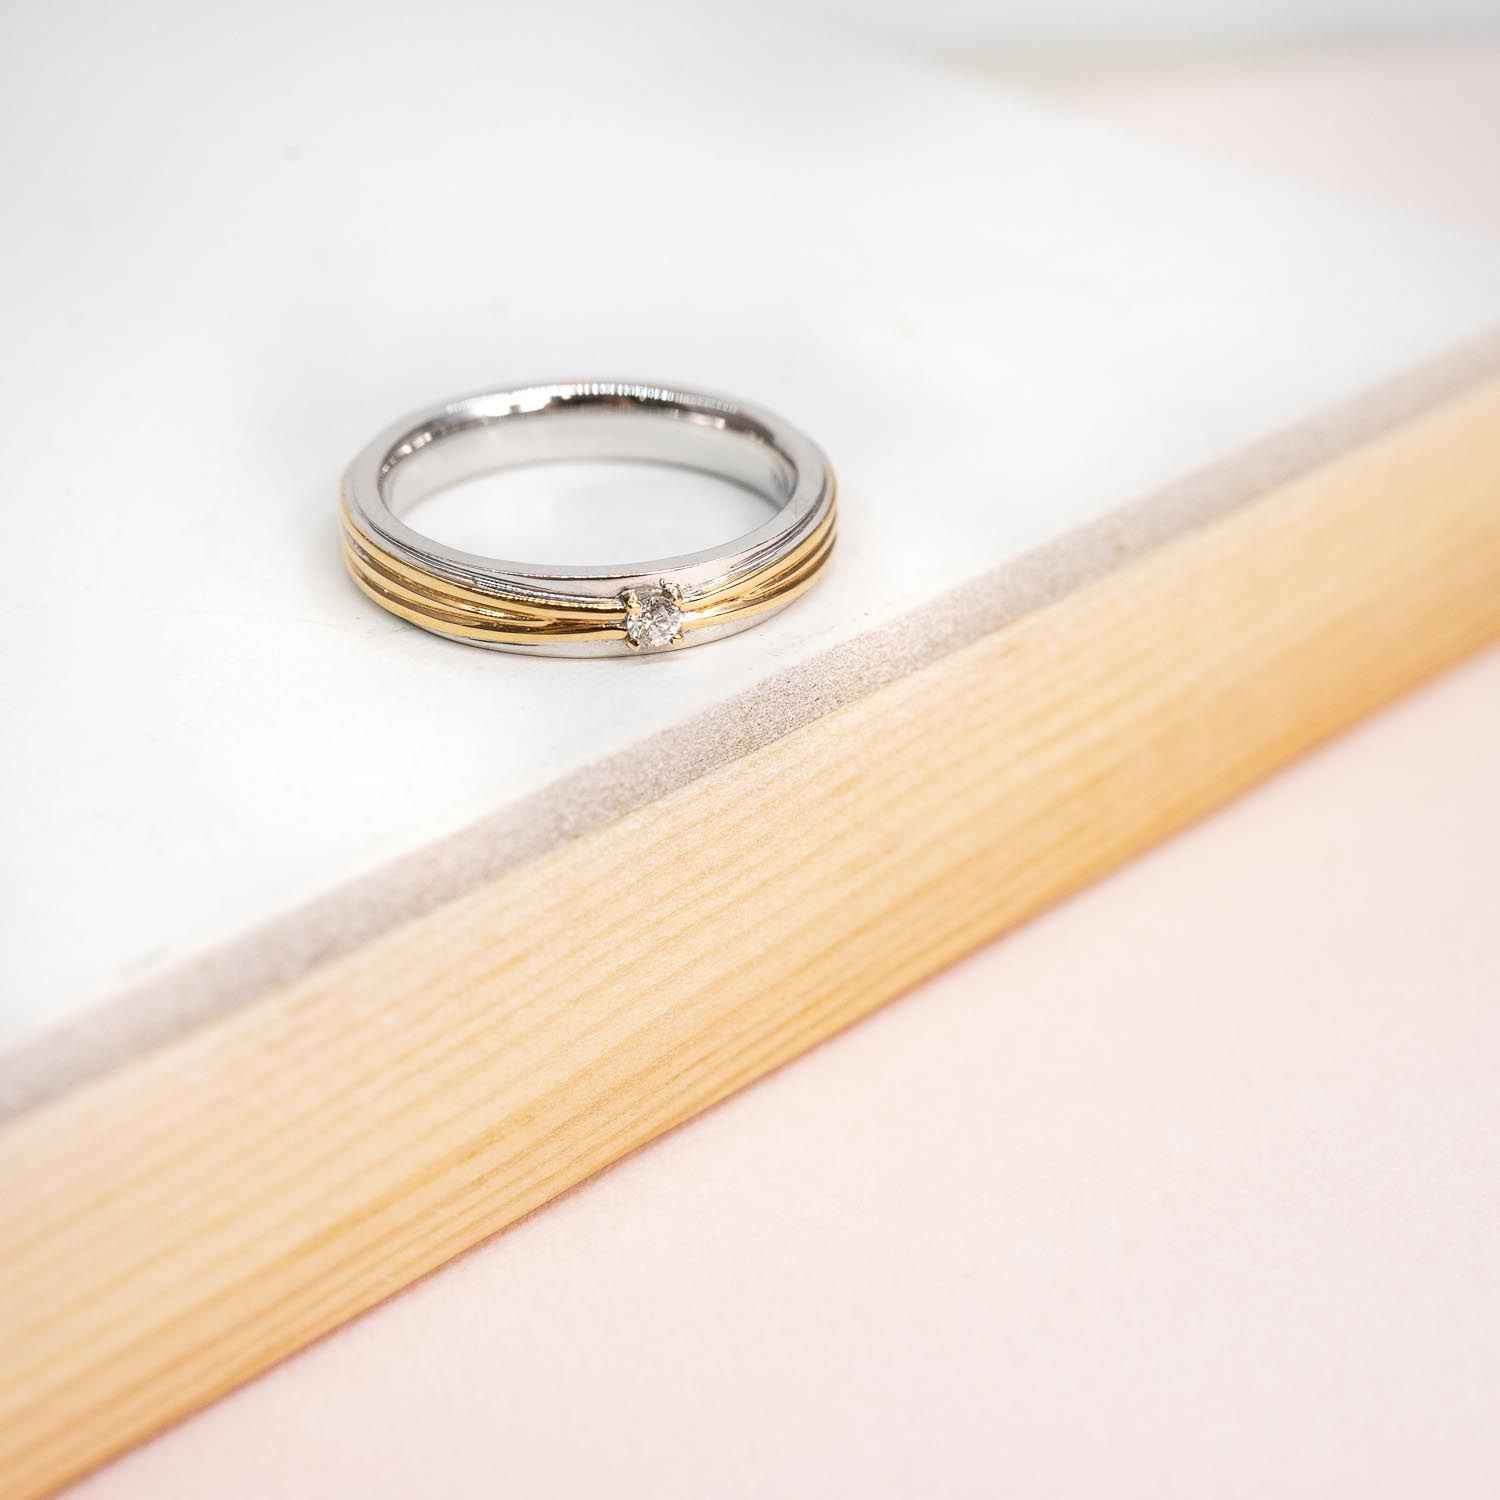 5 Tips Before Buying Your Wedding Ring